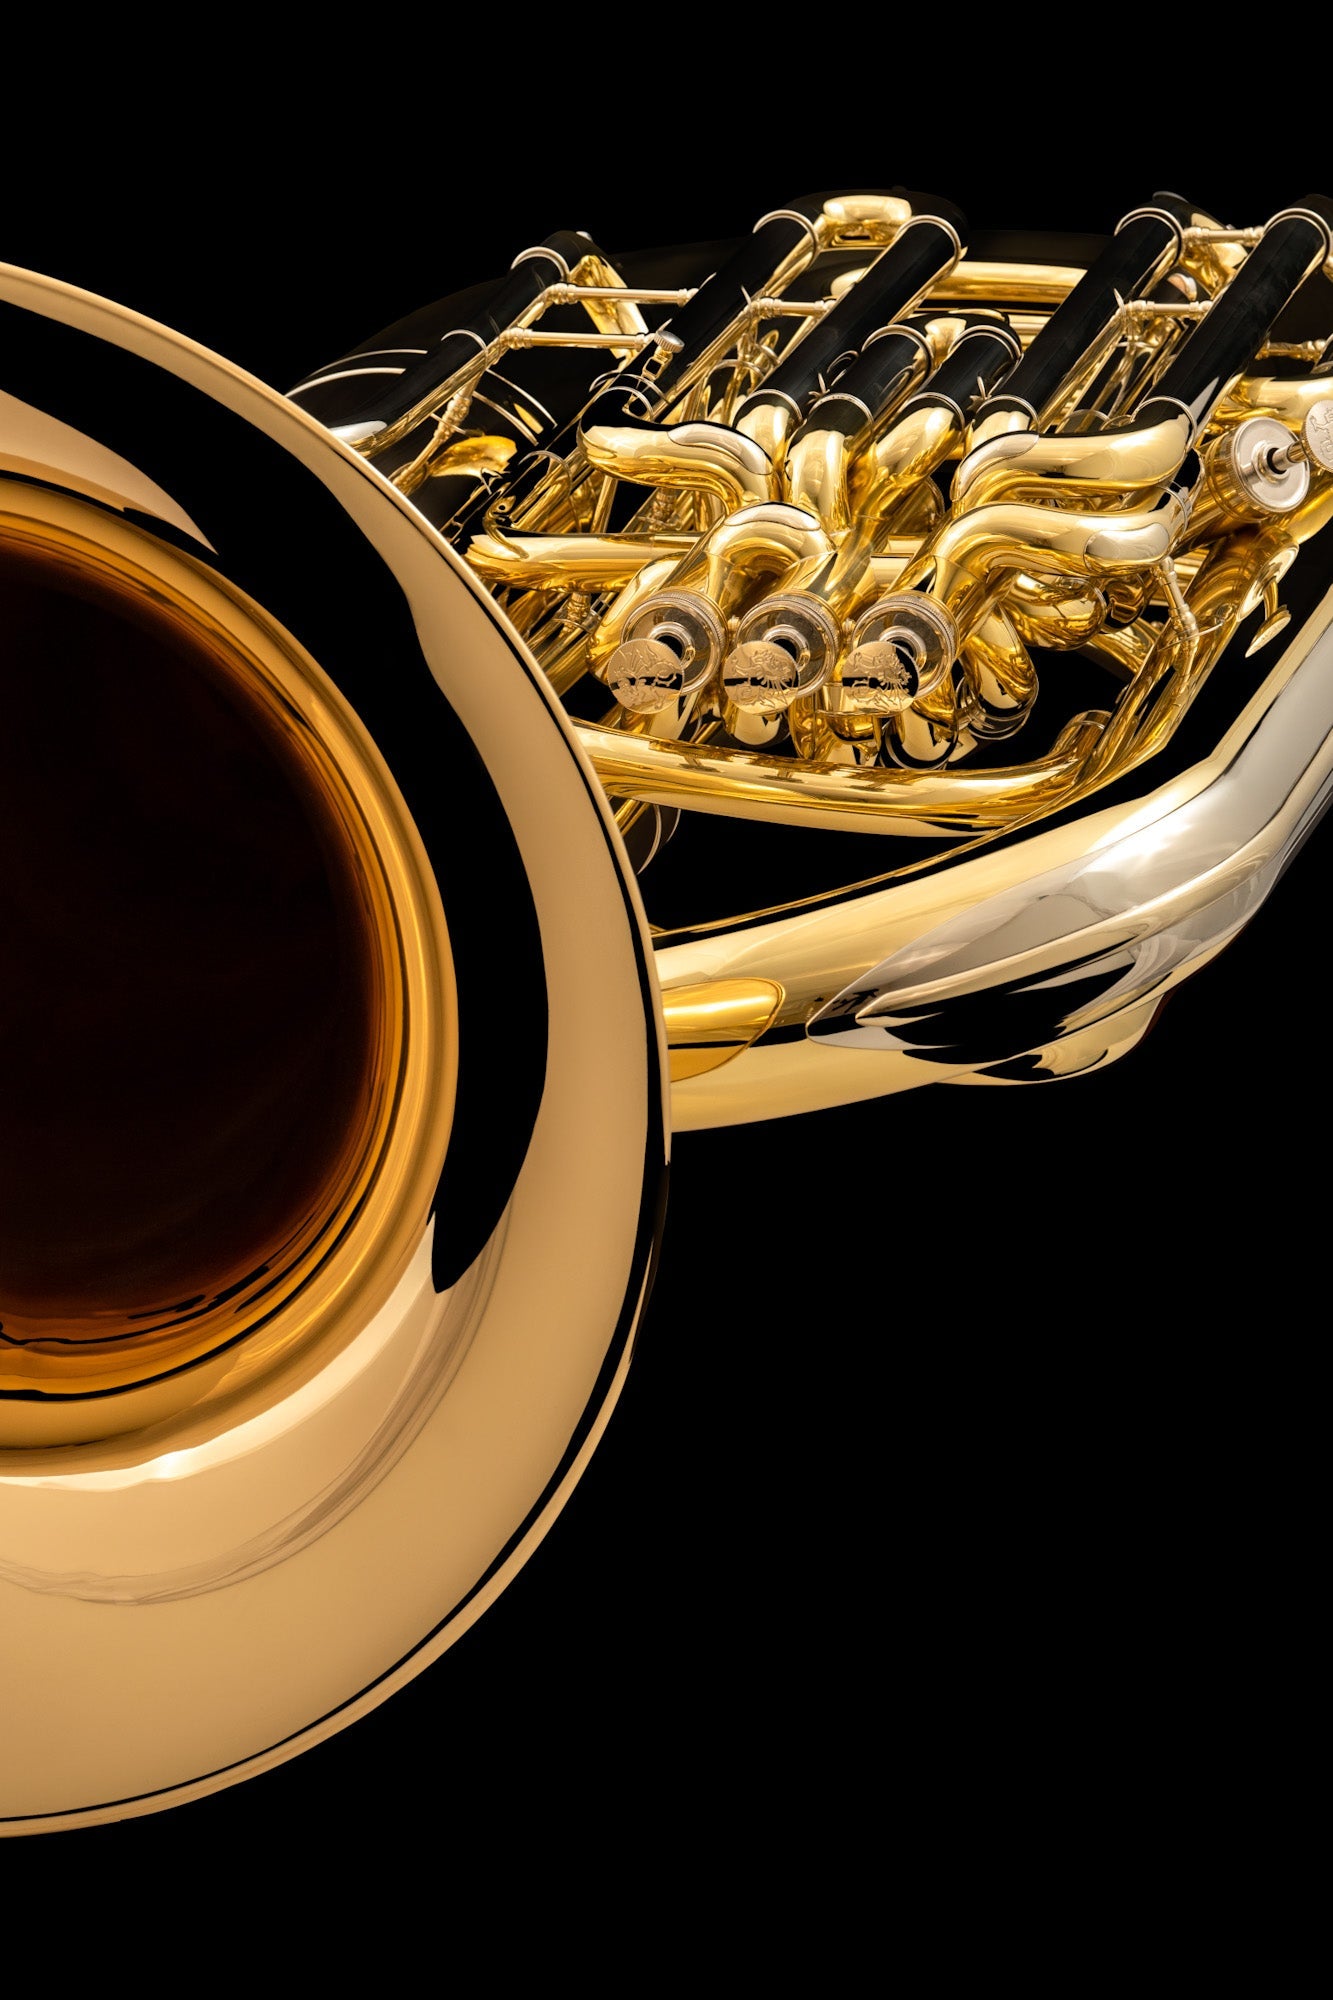 BBb 5/4 Compensated Tuba 'Excelsior' – TB570 – Wessex Tubas